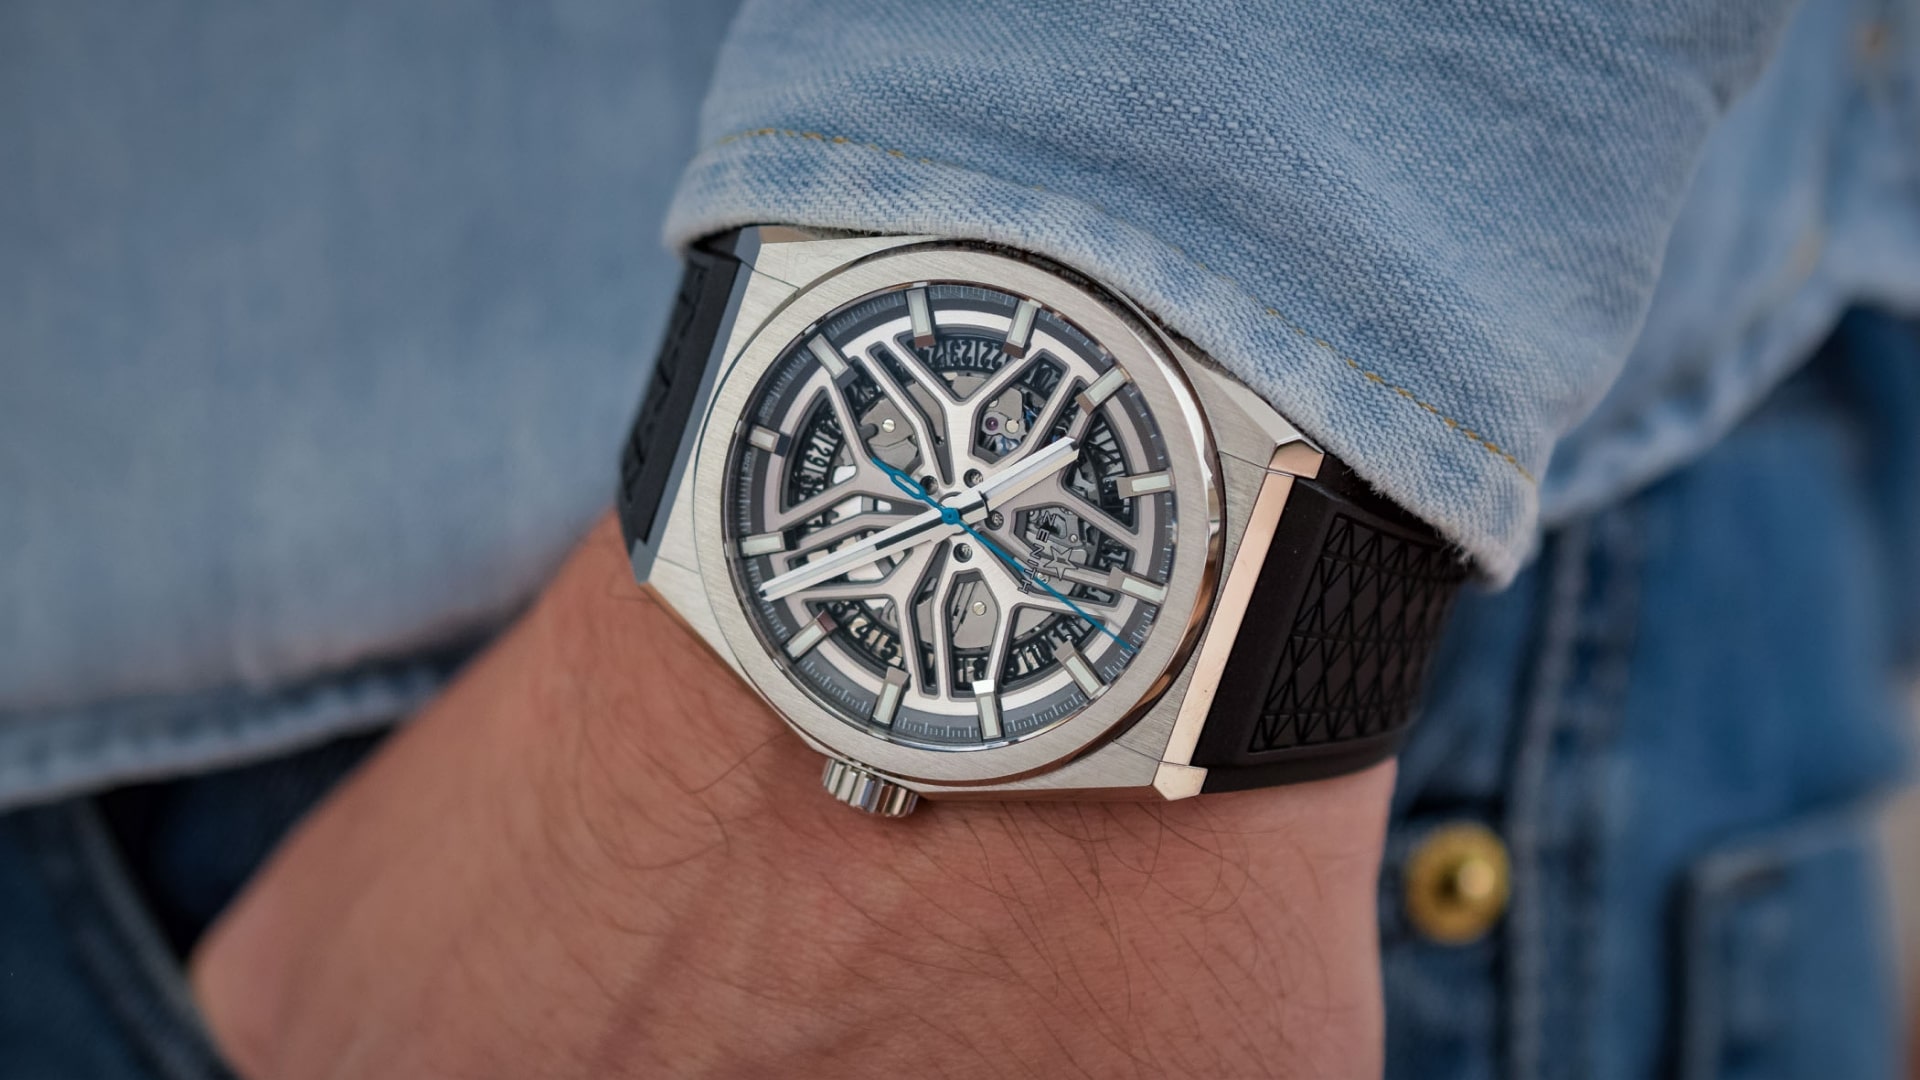 Zenith defy classic Range Rover special edition